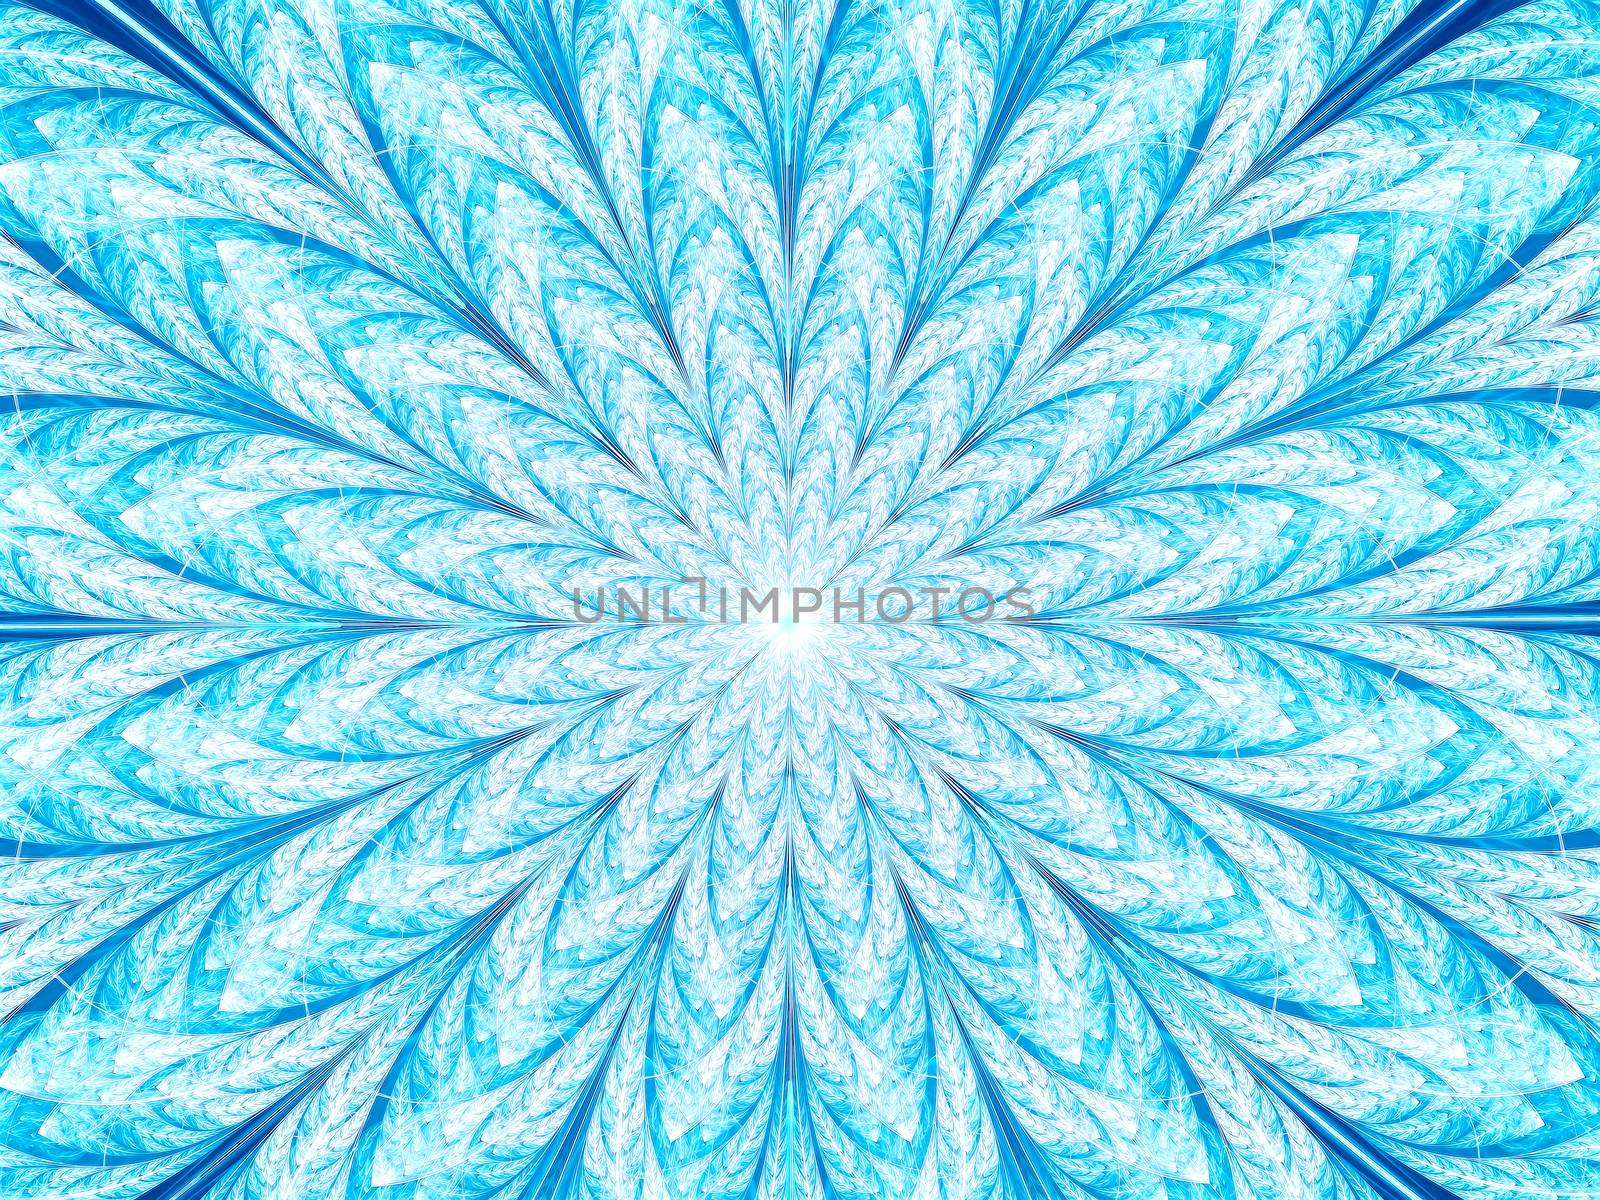 Fractal background - pale ornament like flower or snowflake. Abstract computer-generated image. Textured backdrop for web design, covers, posters.